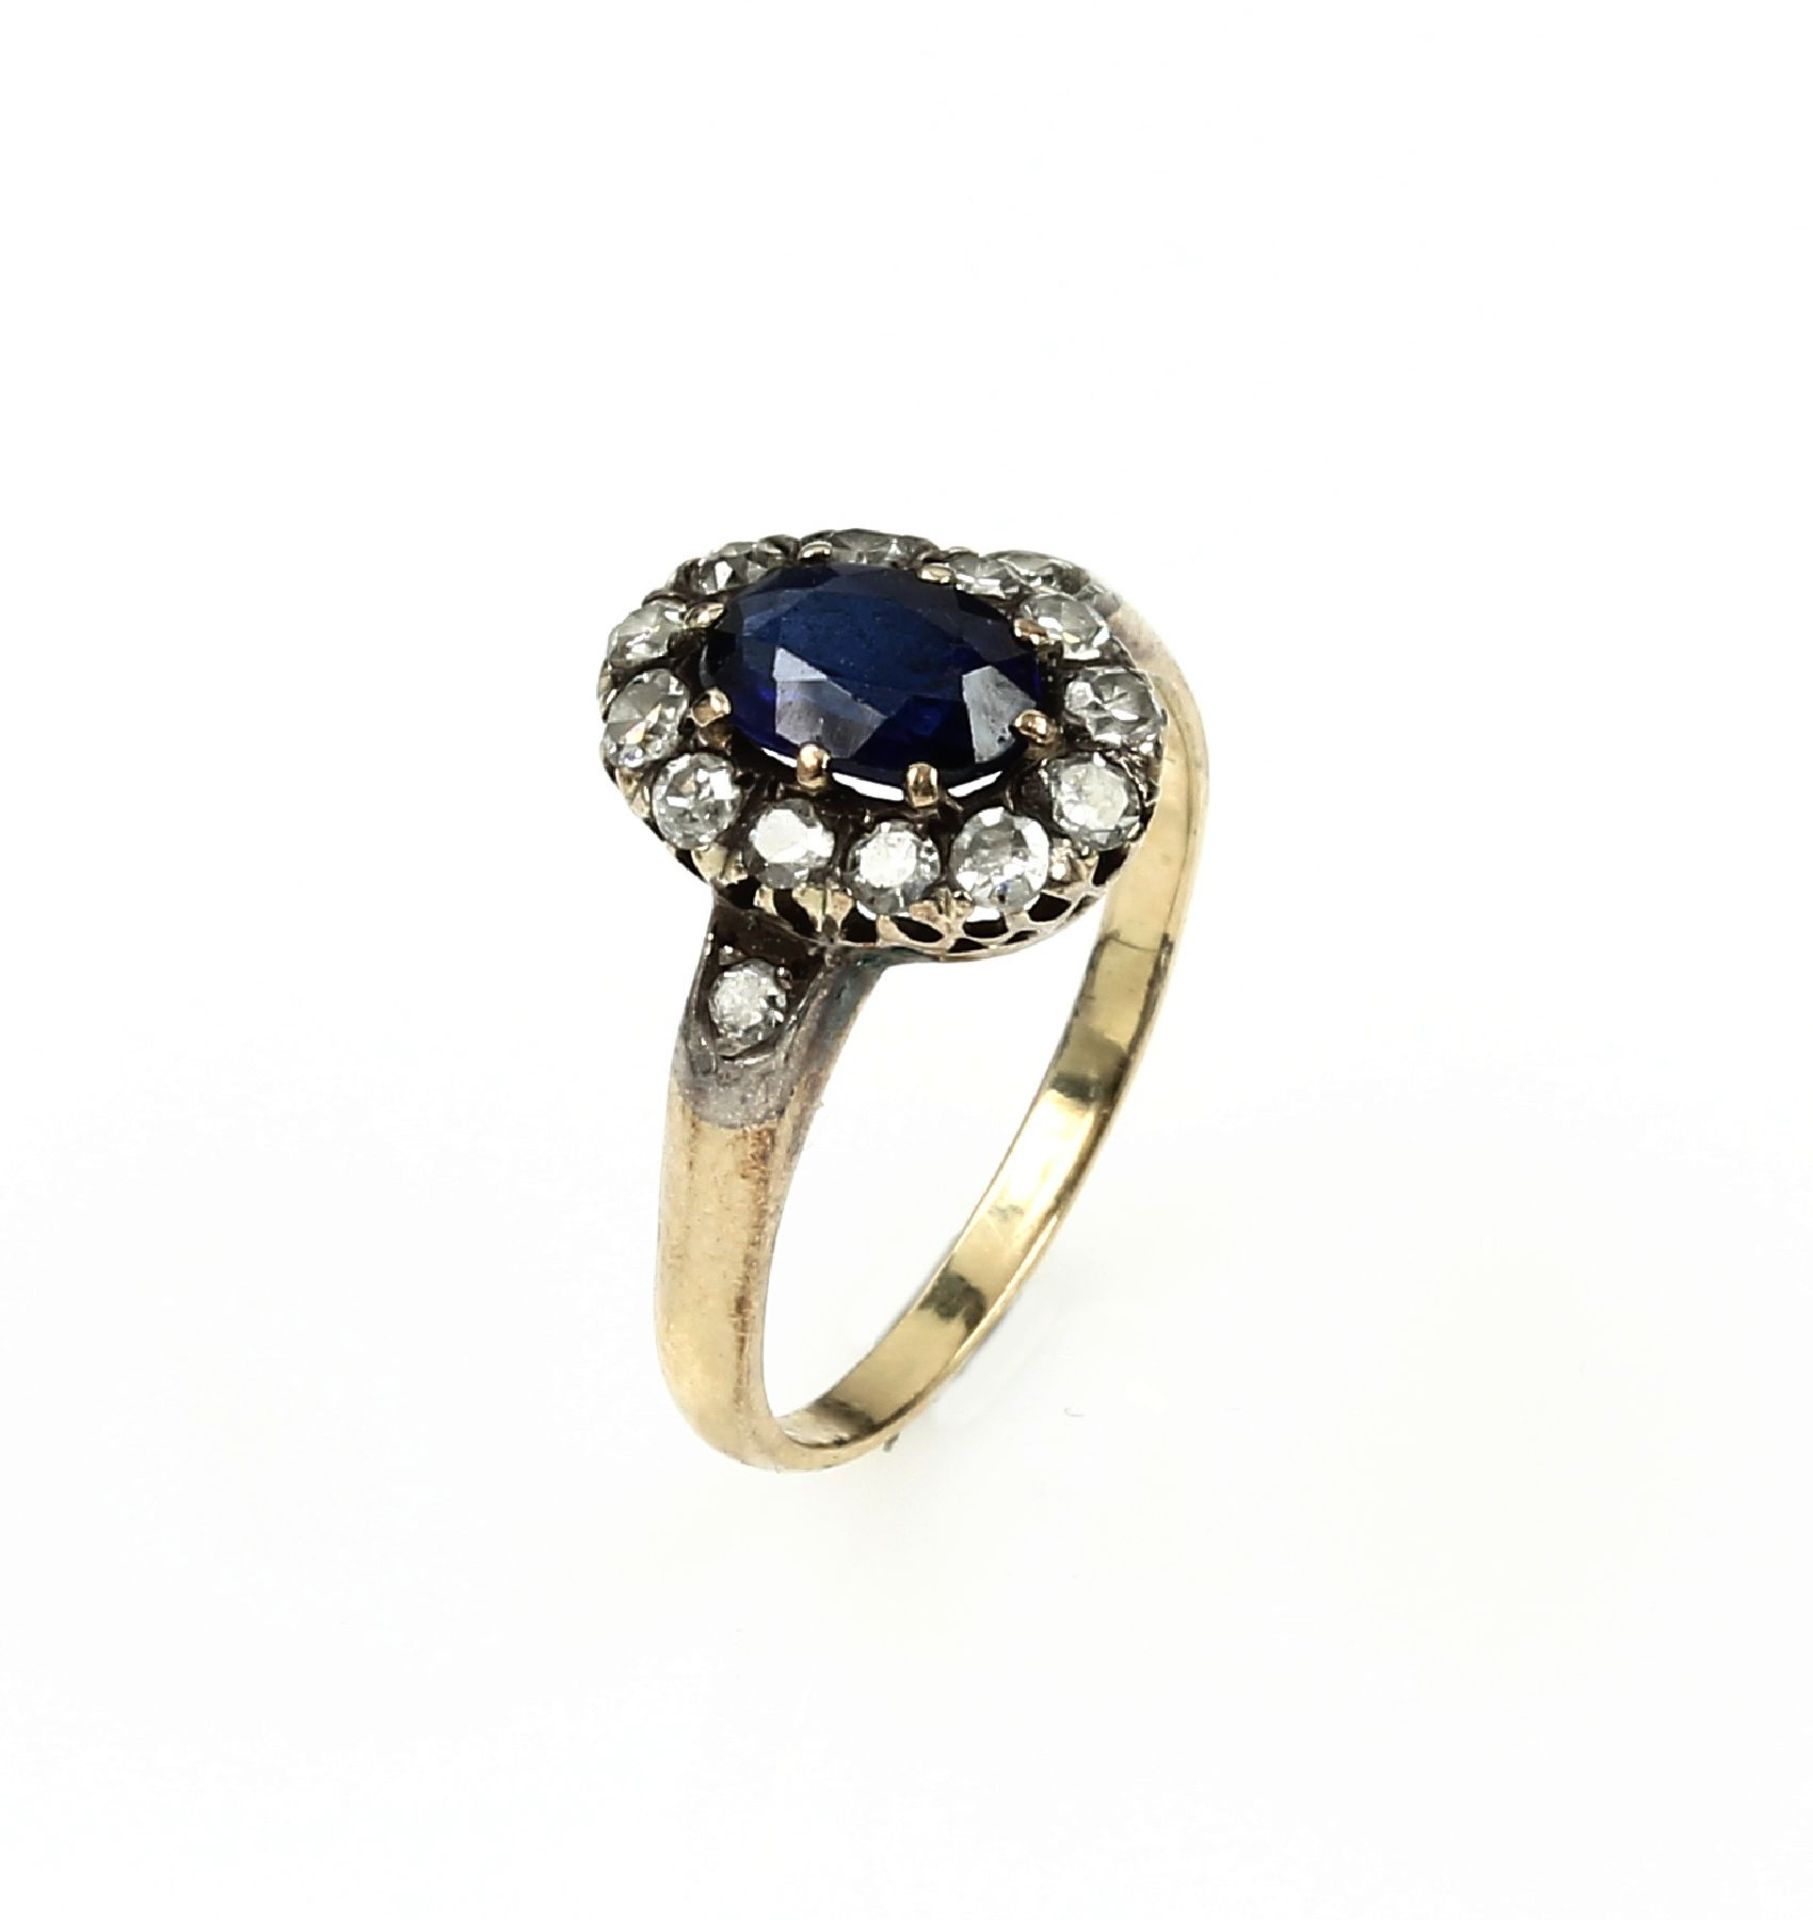 14 kt gold ring with sapphire and diamonds ,YG/WG 585/000, oval bevelled sapphire approx. 0.50 ct,